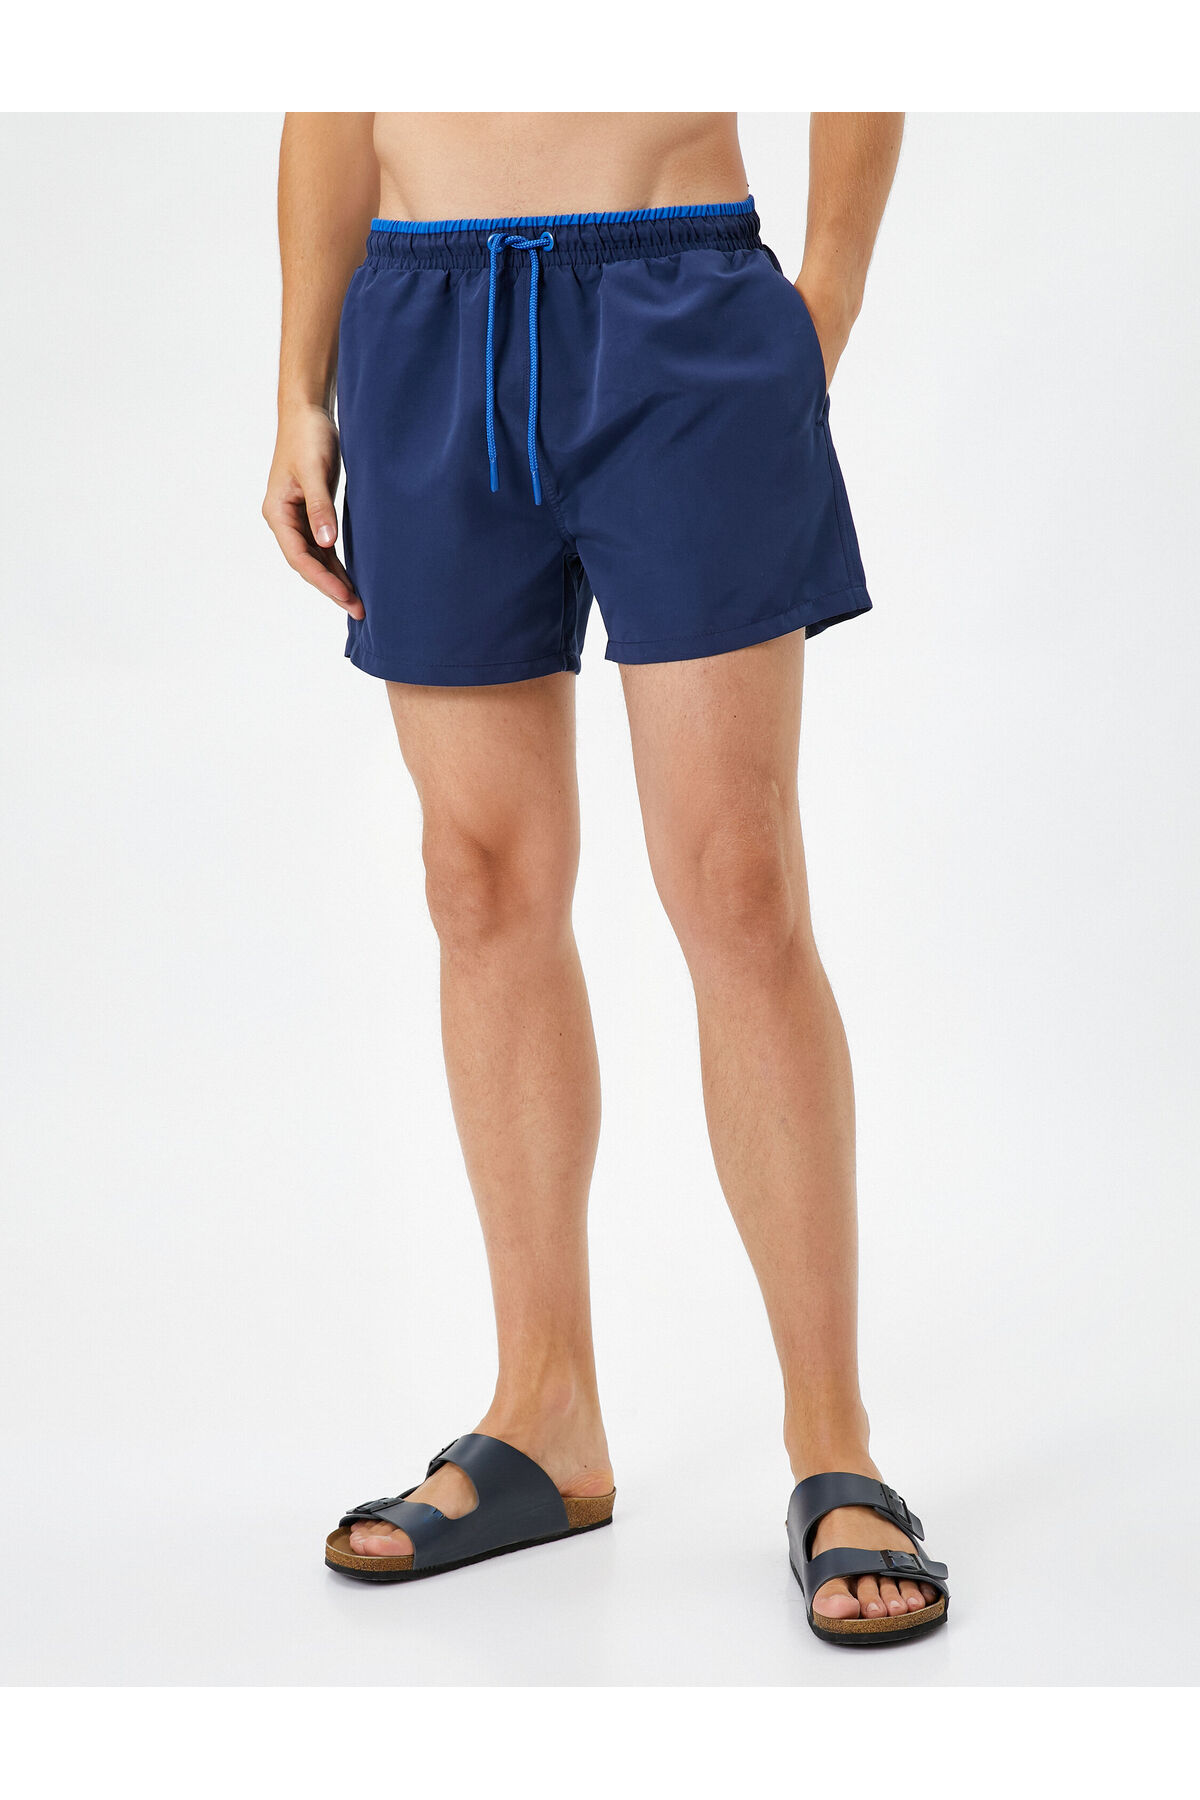 Levně Koton Shorts Marine Shorts with a lace-up waist with pockets.